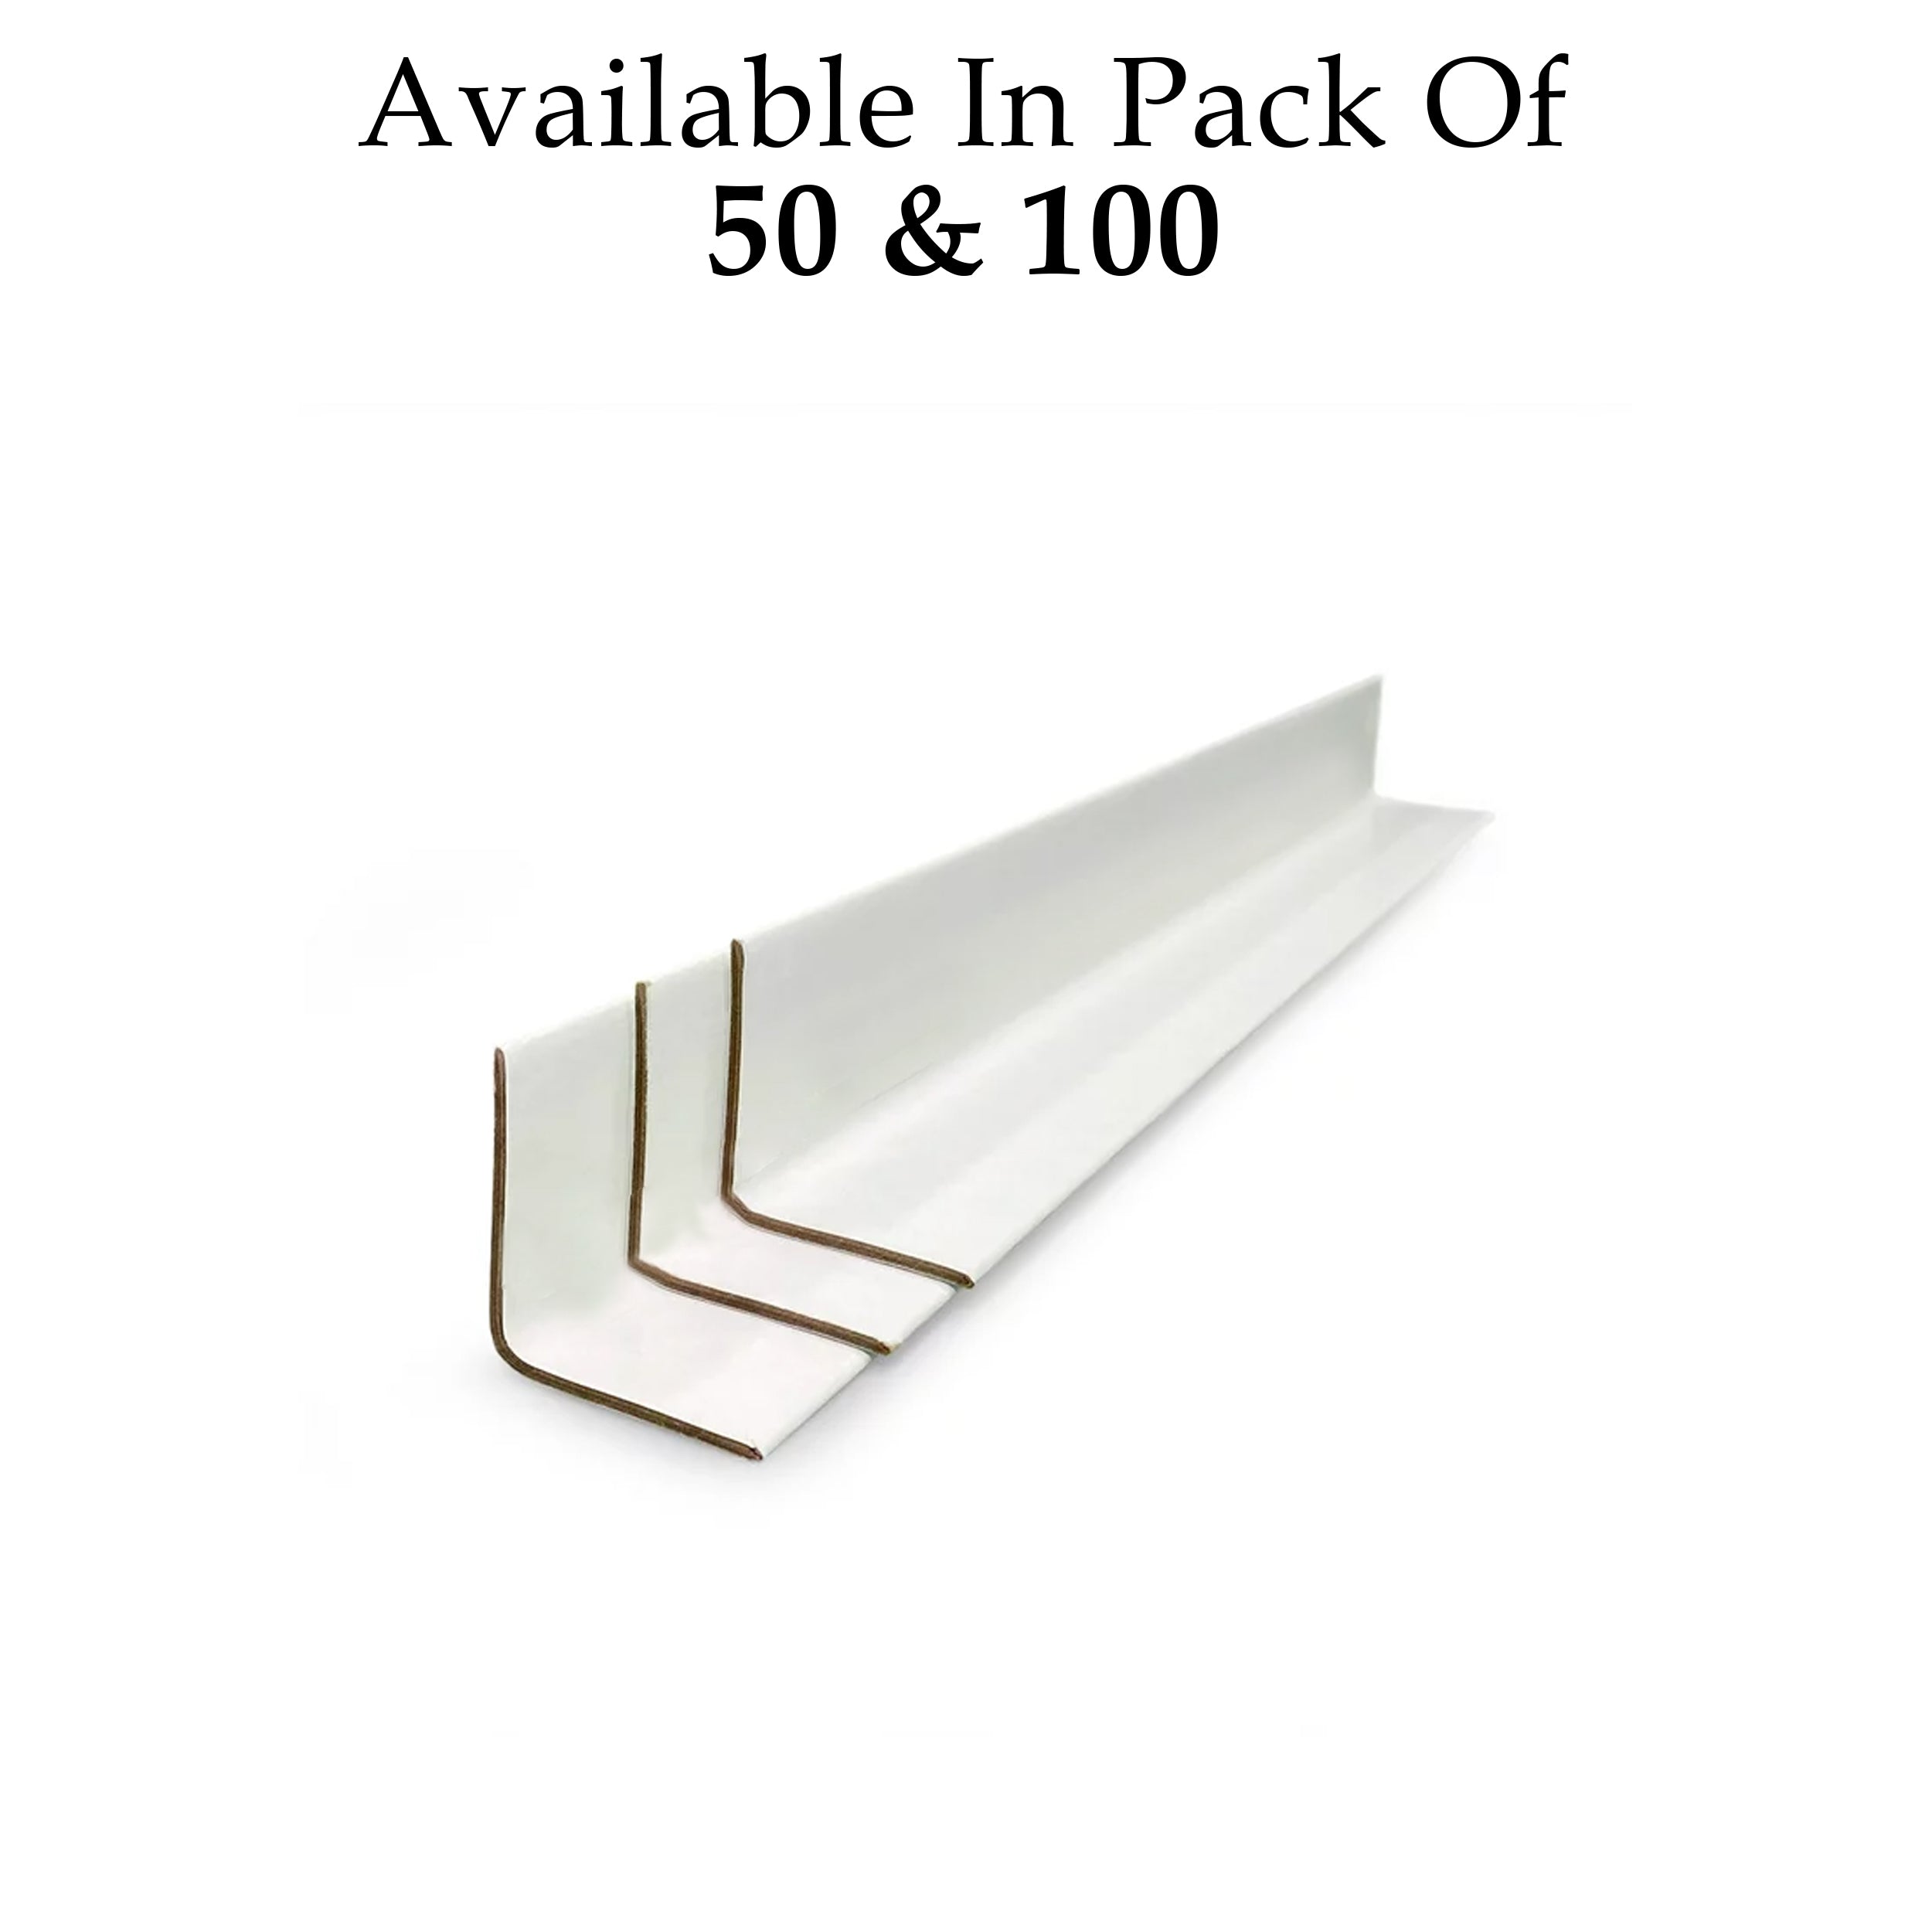 Cardboard Edge Protectors 47'' X 2'' X 2'' Pack of 100 cardboard protectors for pallets, White V-Board Reinforced Edges/Corners for Shipping, Corner Protectors for Moving/Packing